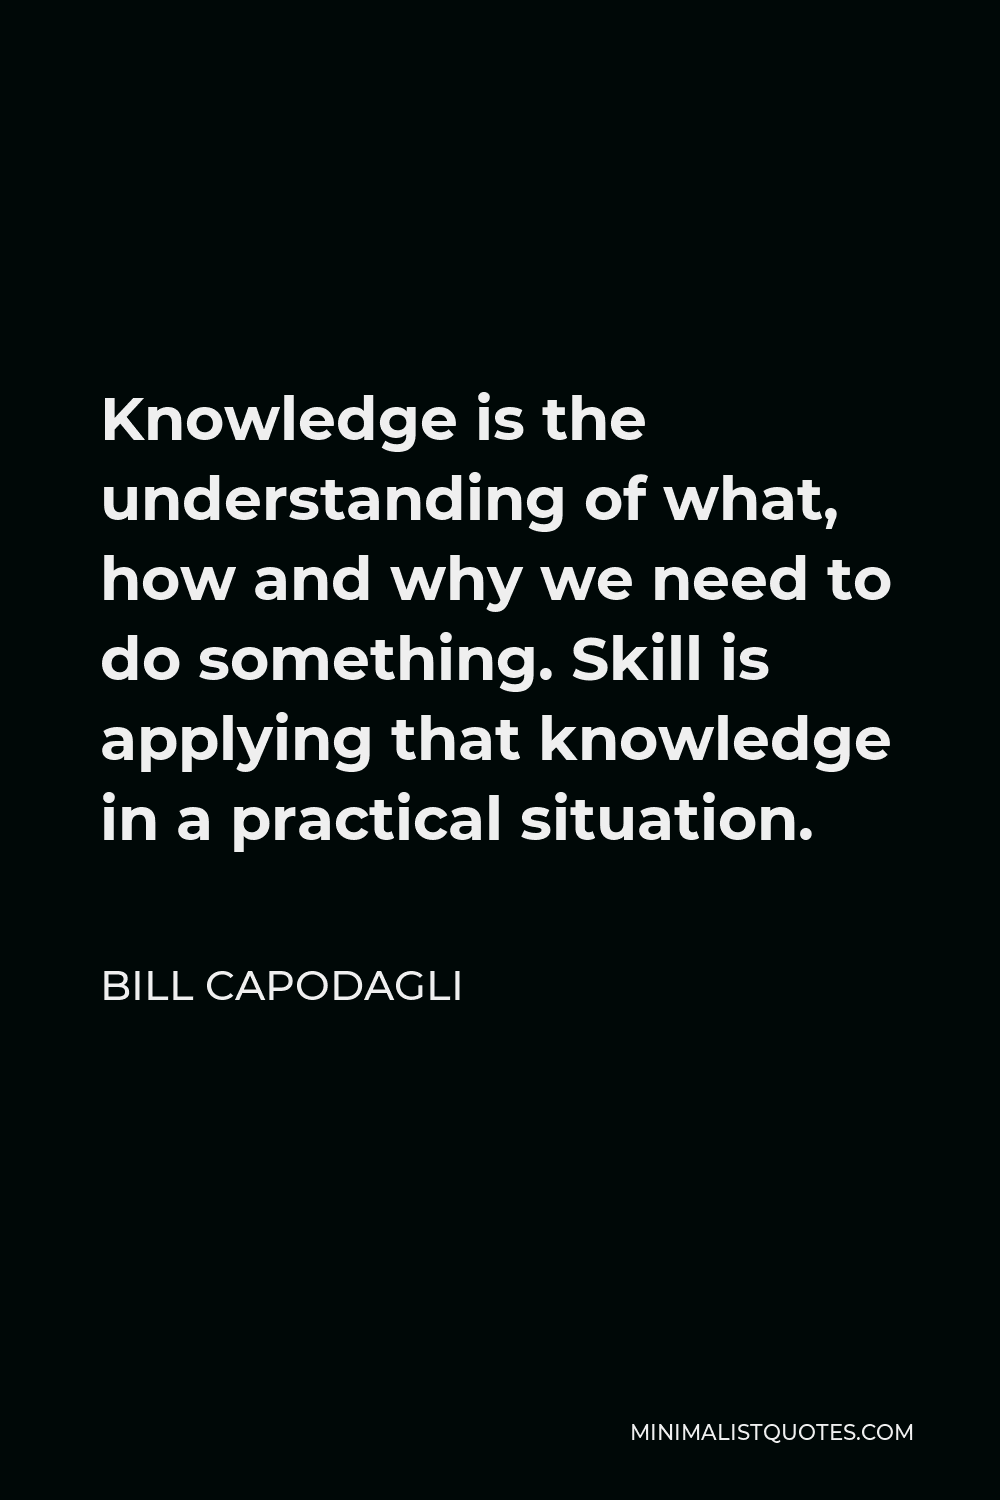 Bill Capodagli Quote - Knowledge is the understanding of what, how and why we need to do something. Skill is applying that knowledge in a practical situation.